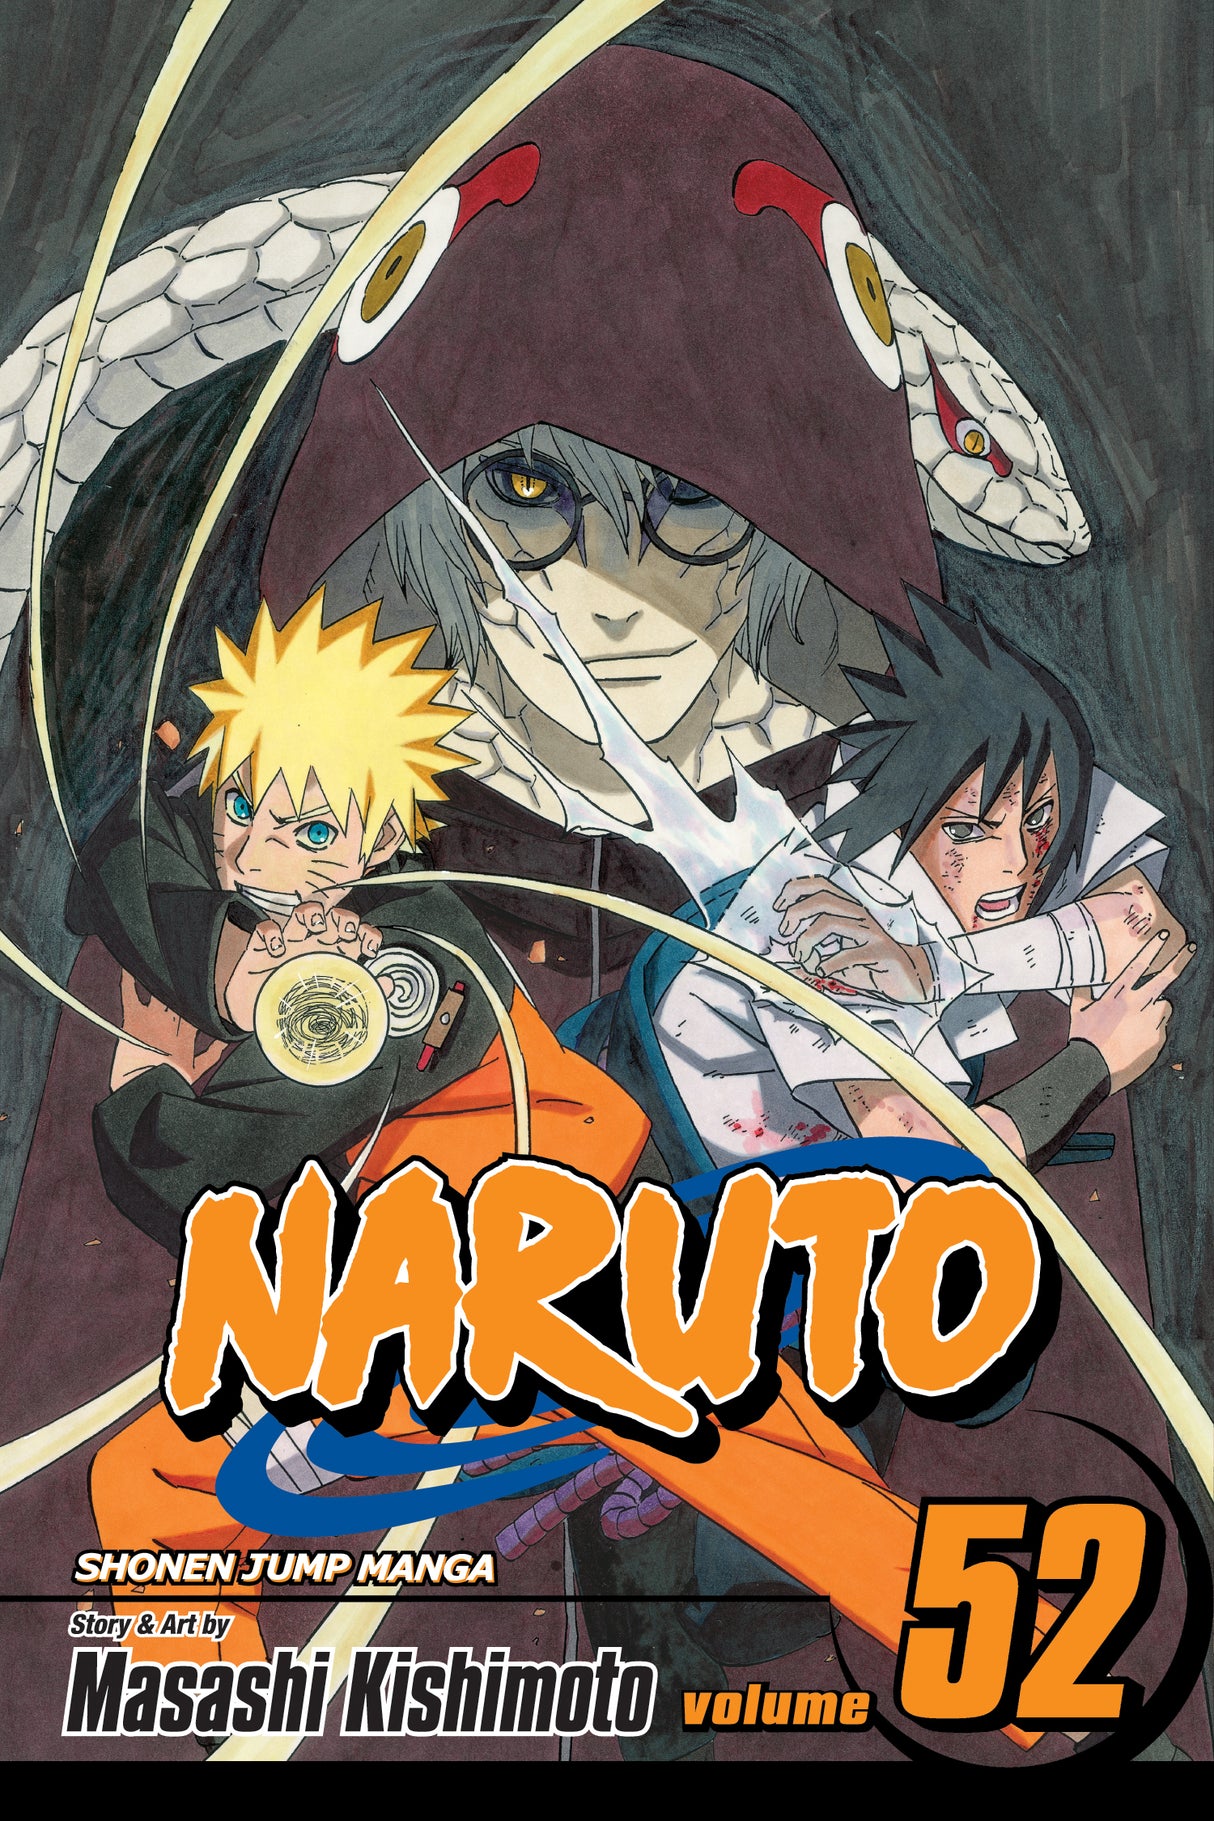 Cover image of the Manga Naruto, Vol.52: Cell Seven Reunion